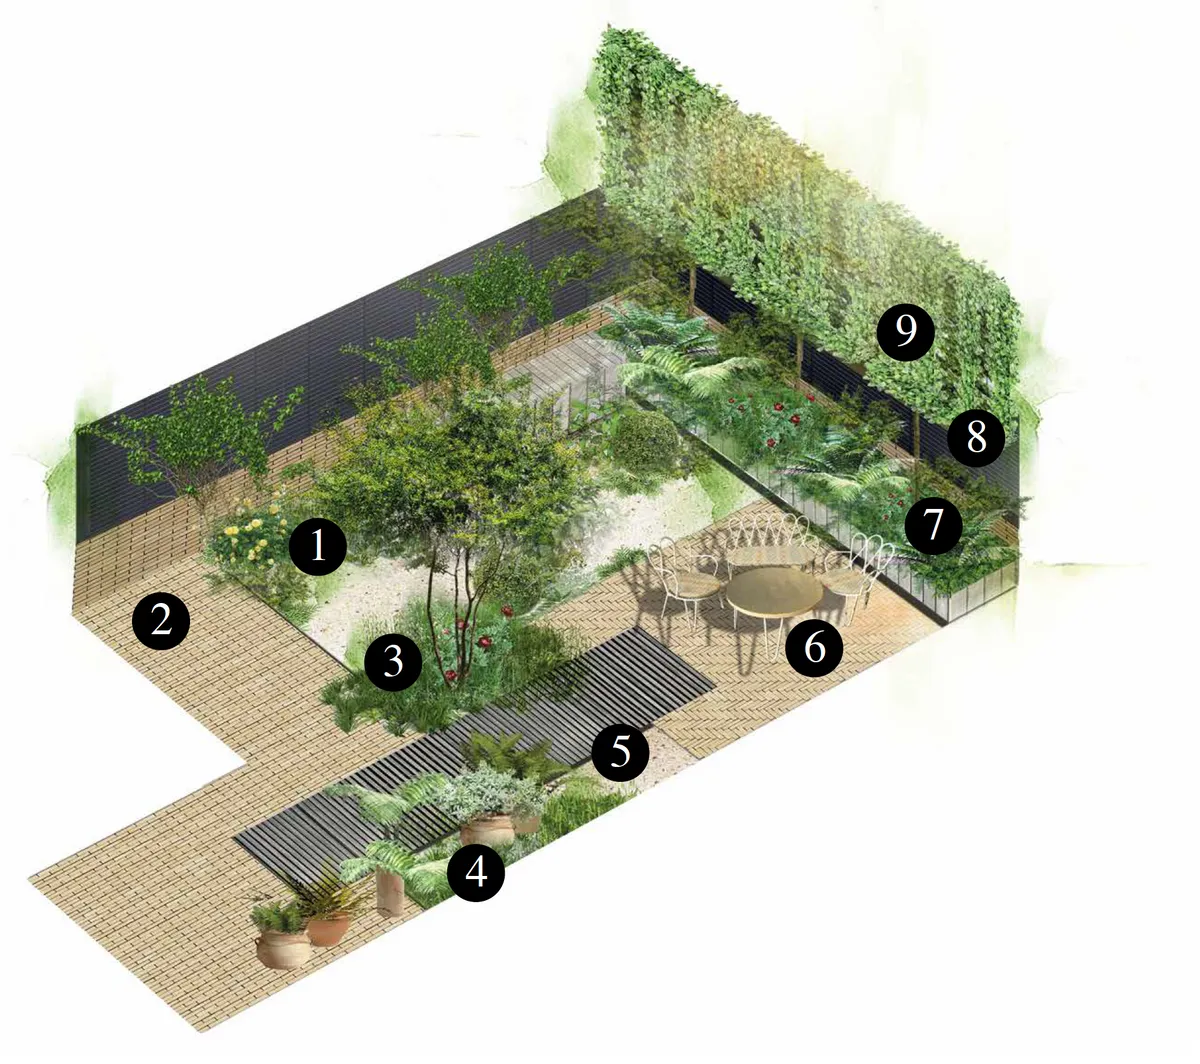 Balance garden design with numbers